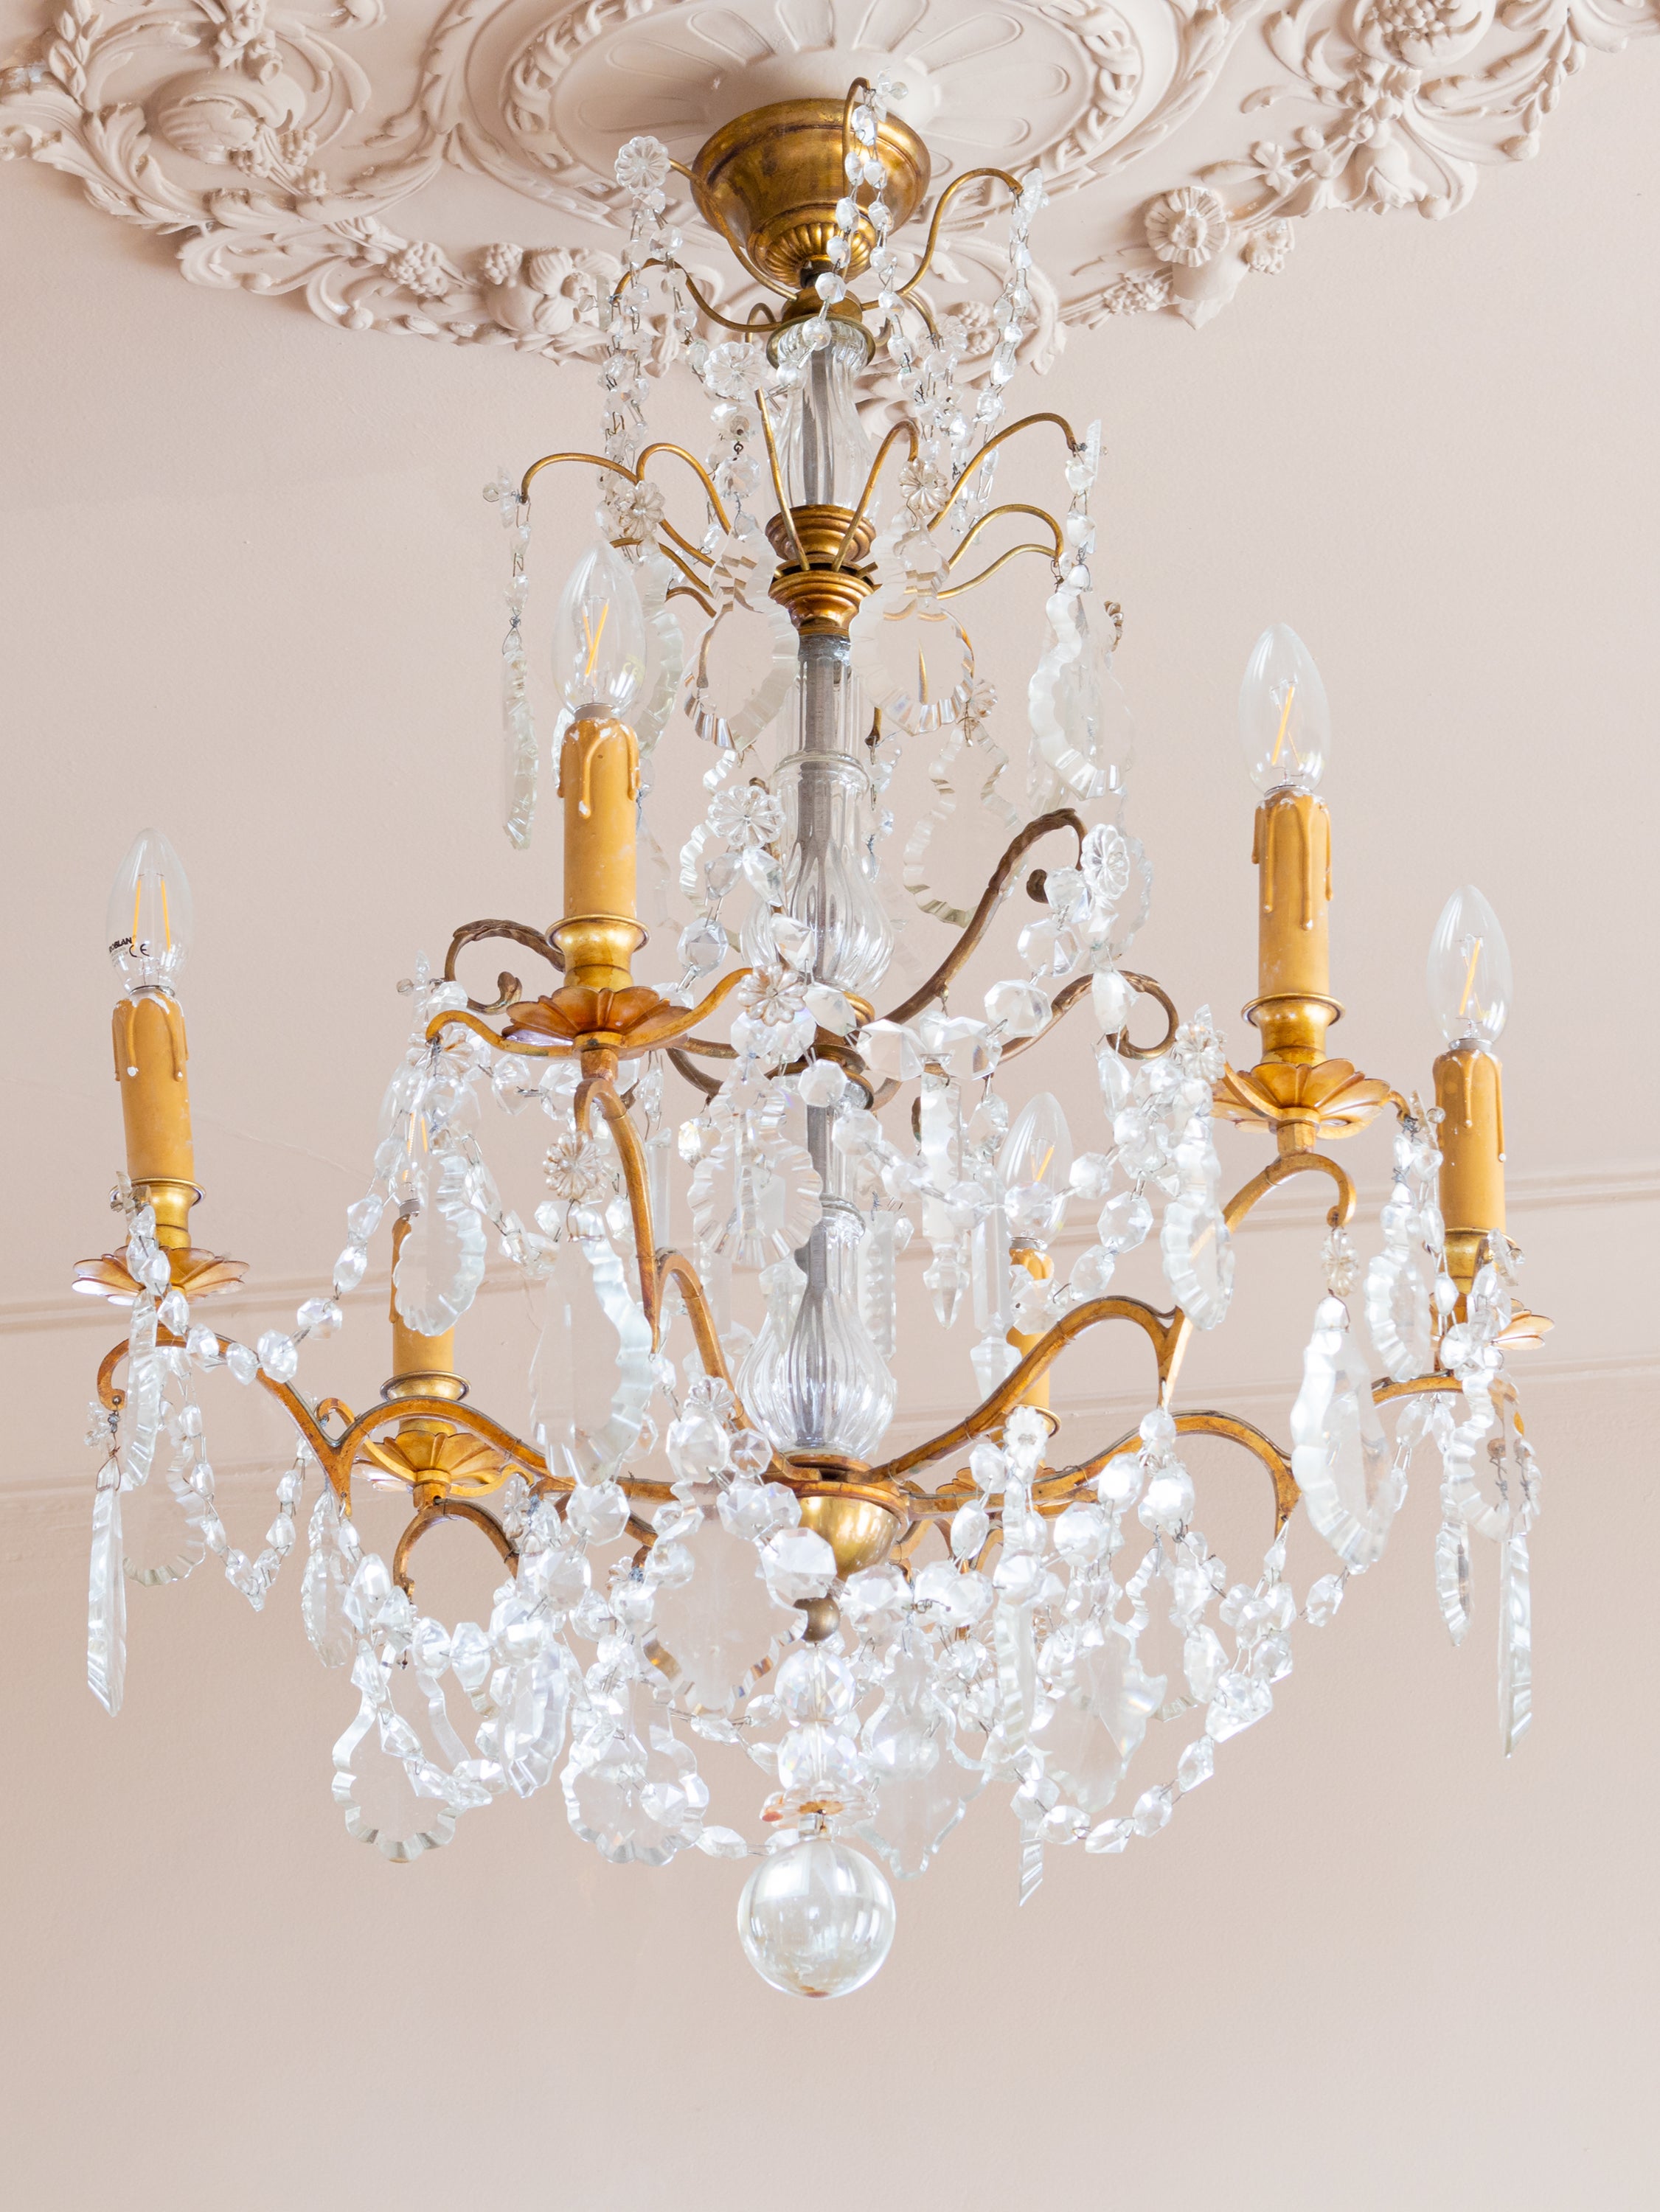 Four Six Holder Crystal chandelier Louis XV 19th Century